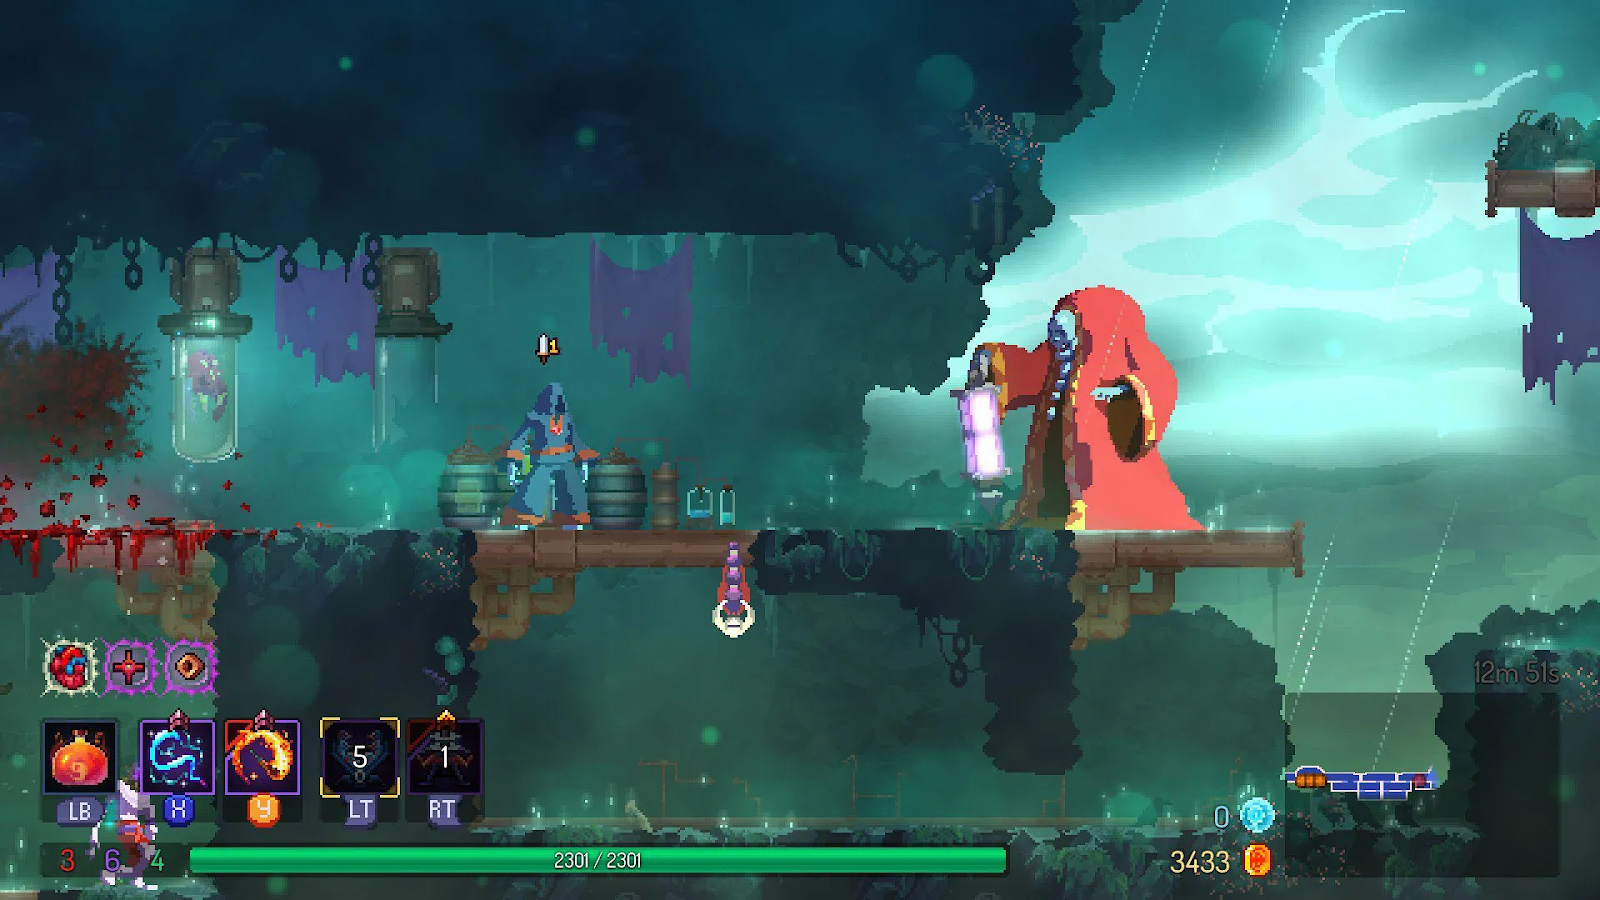 gameplay of dead cells